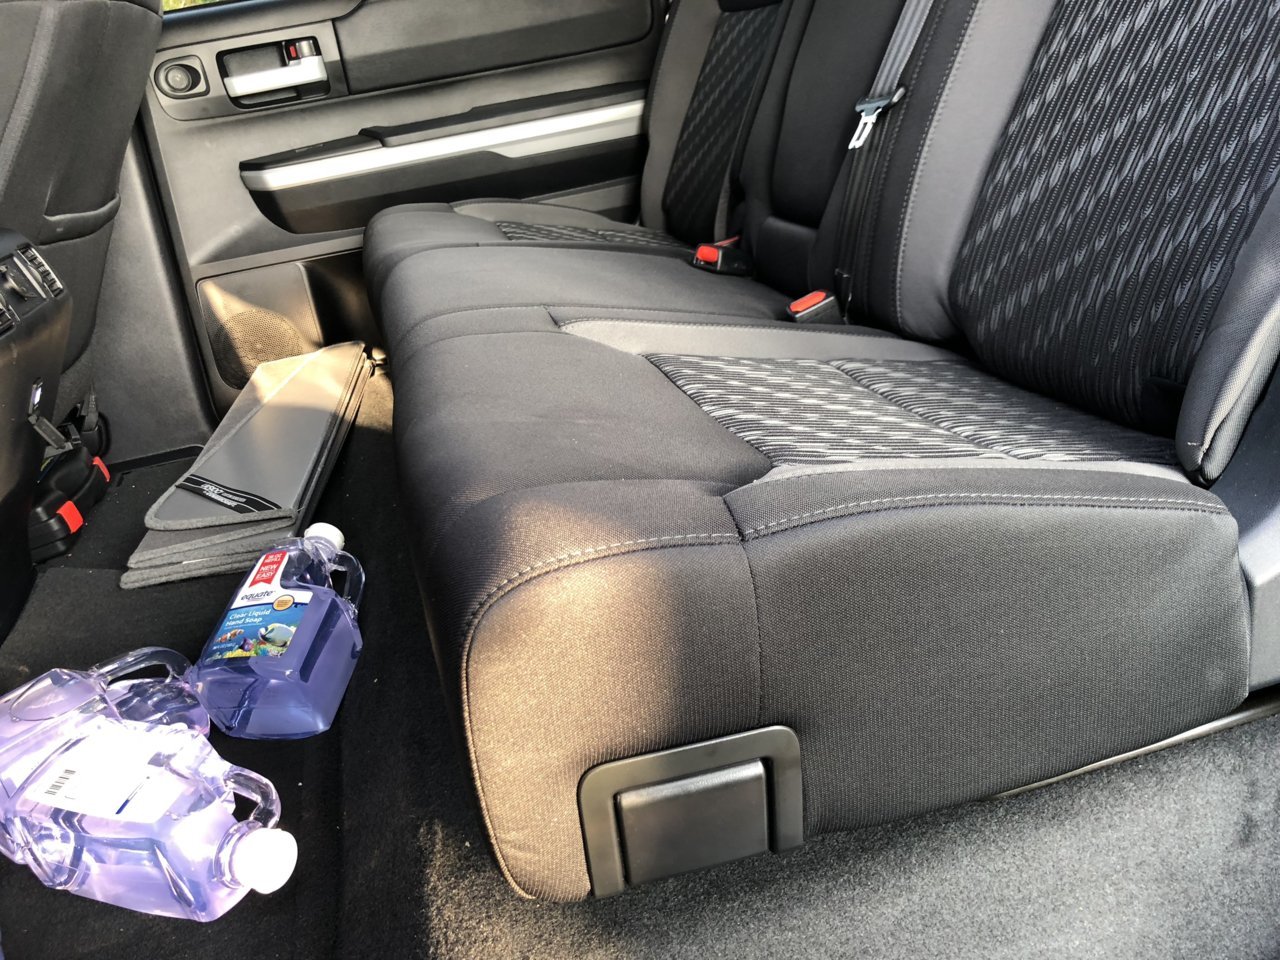 SOLD - 2018 Crewmax Seat Covers | Toyota Tundra Forum